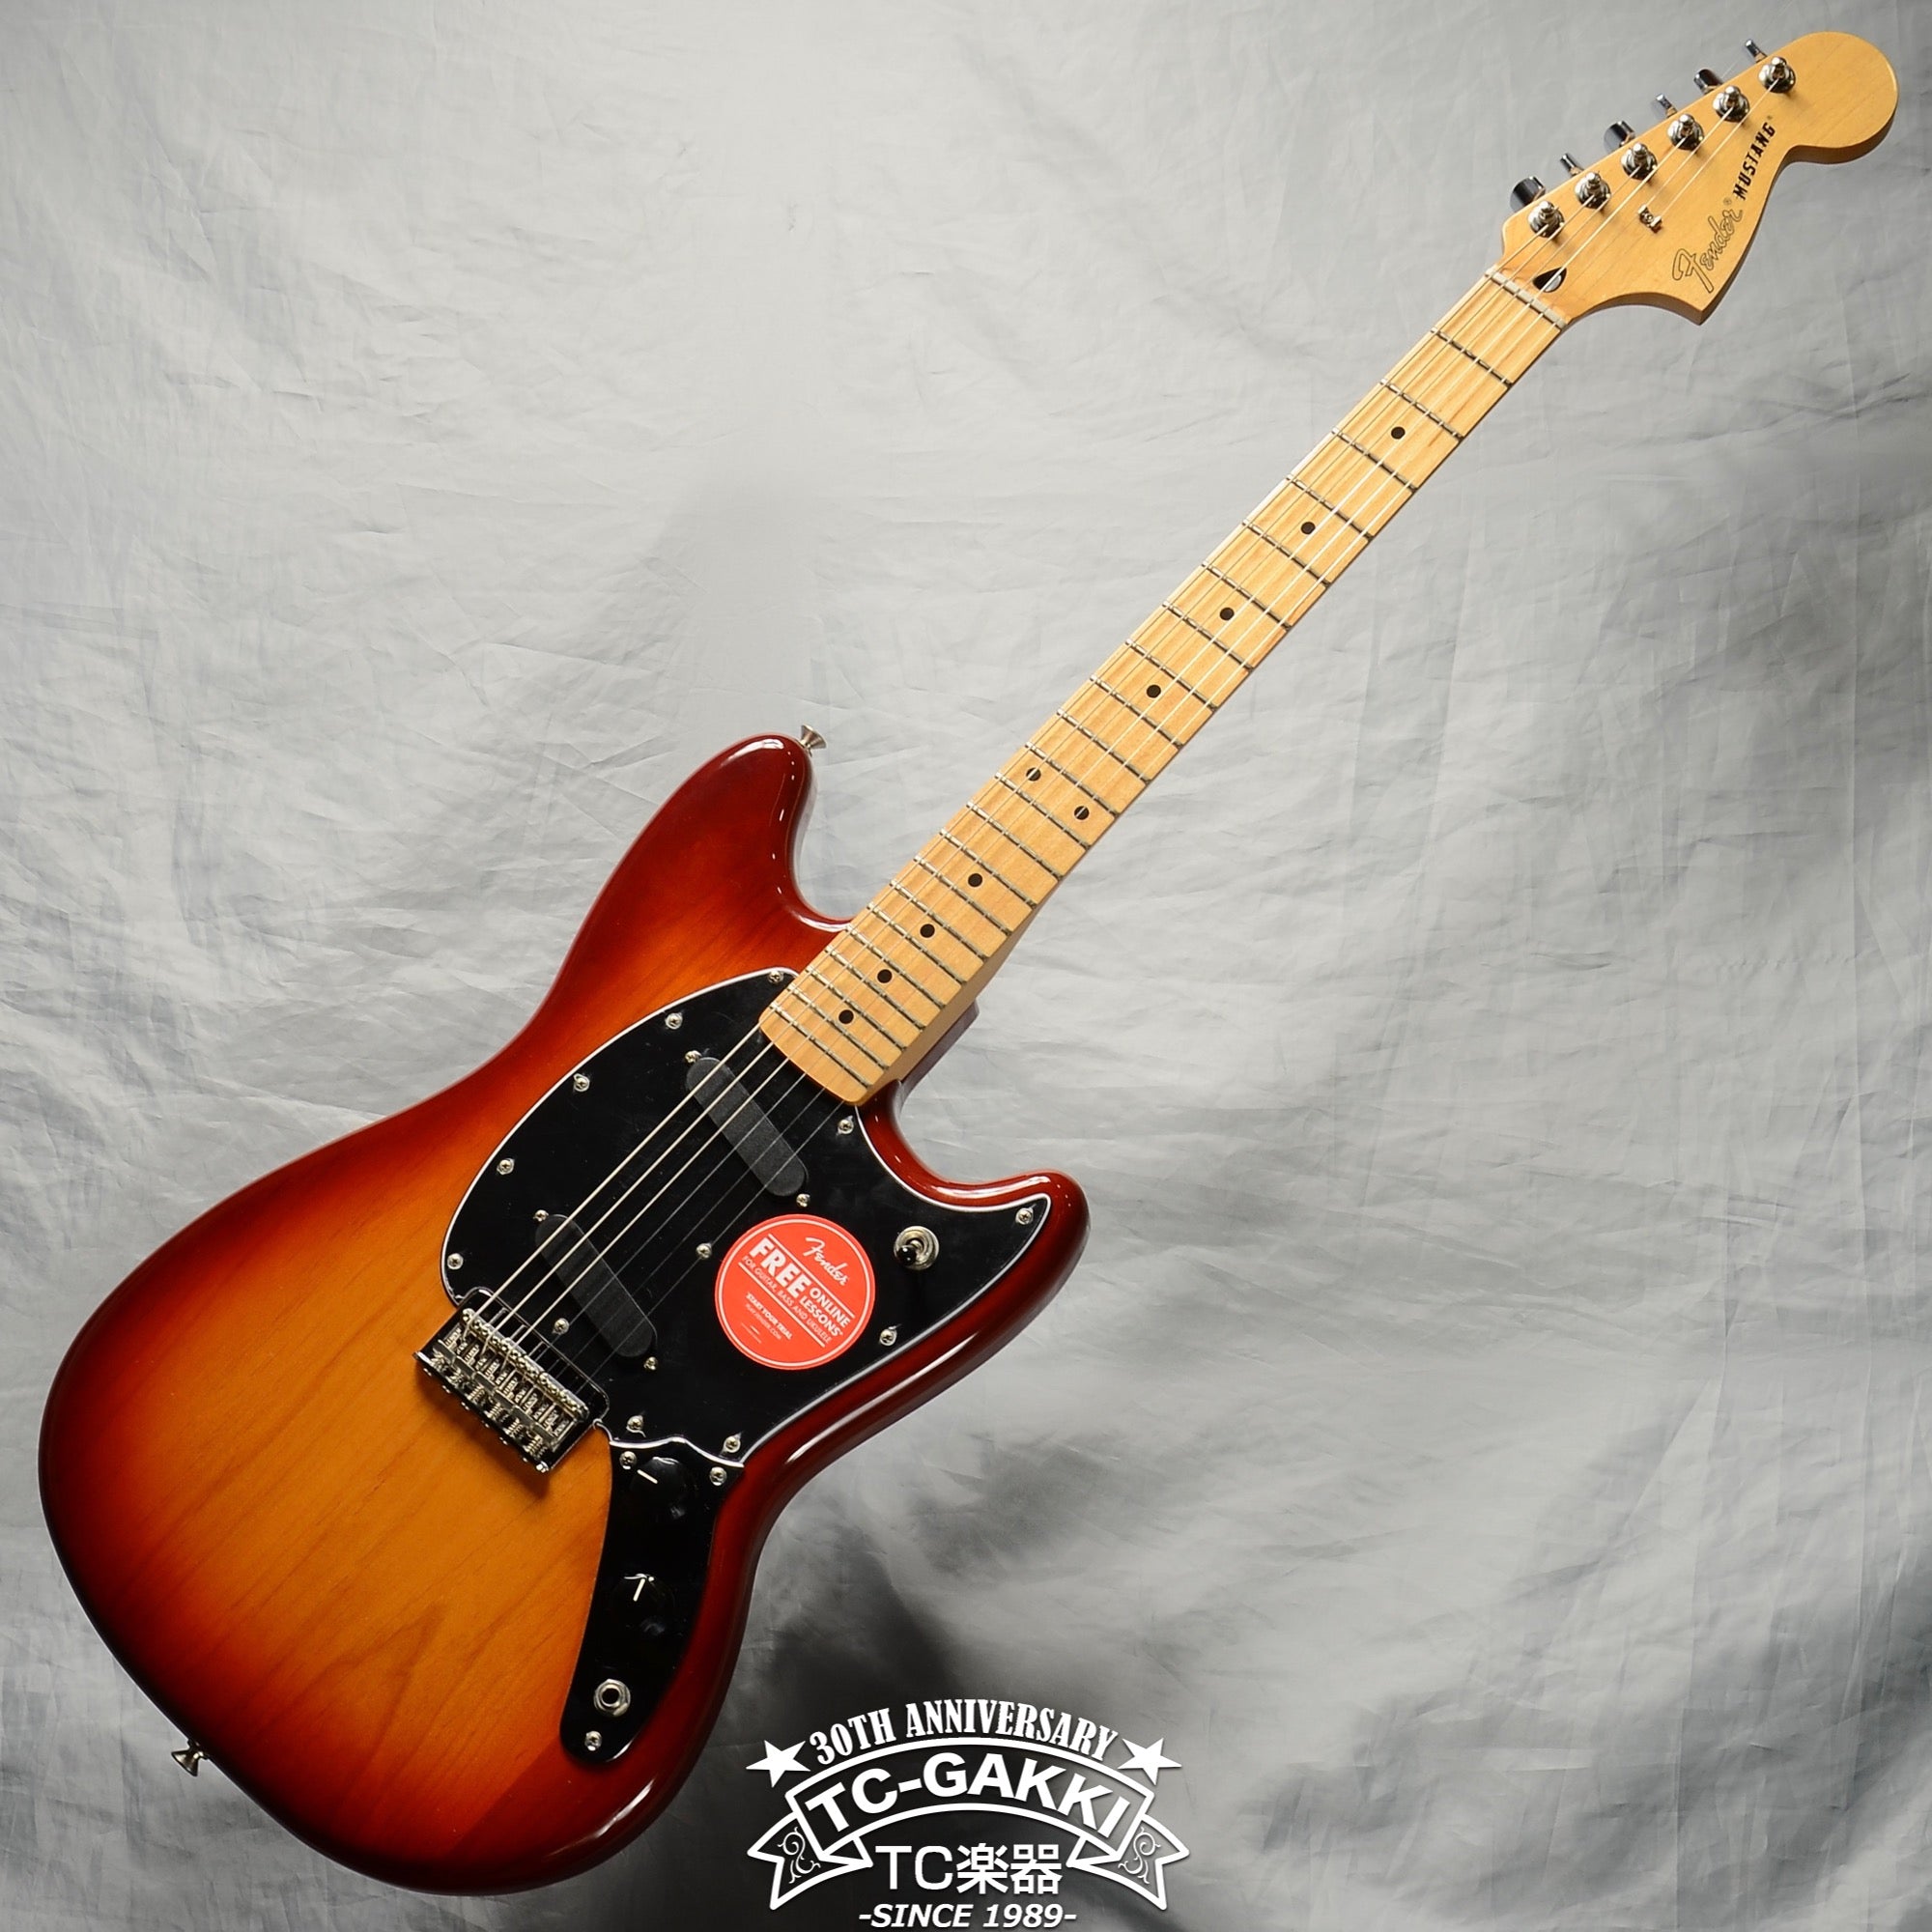 Fender Mexico Player Mustang 2019 0 Guitar For Sale TCGAKKI